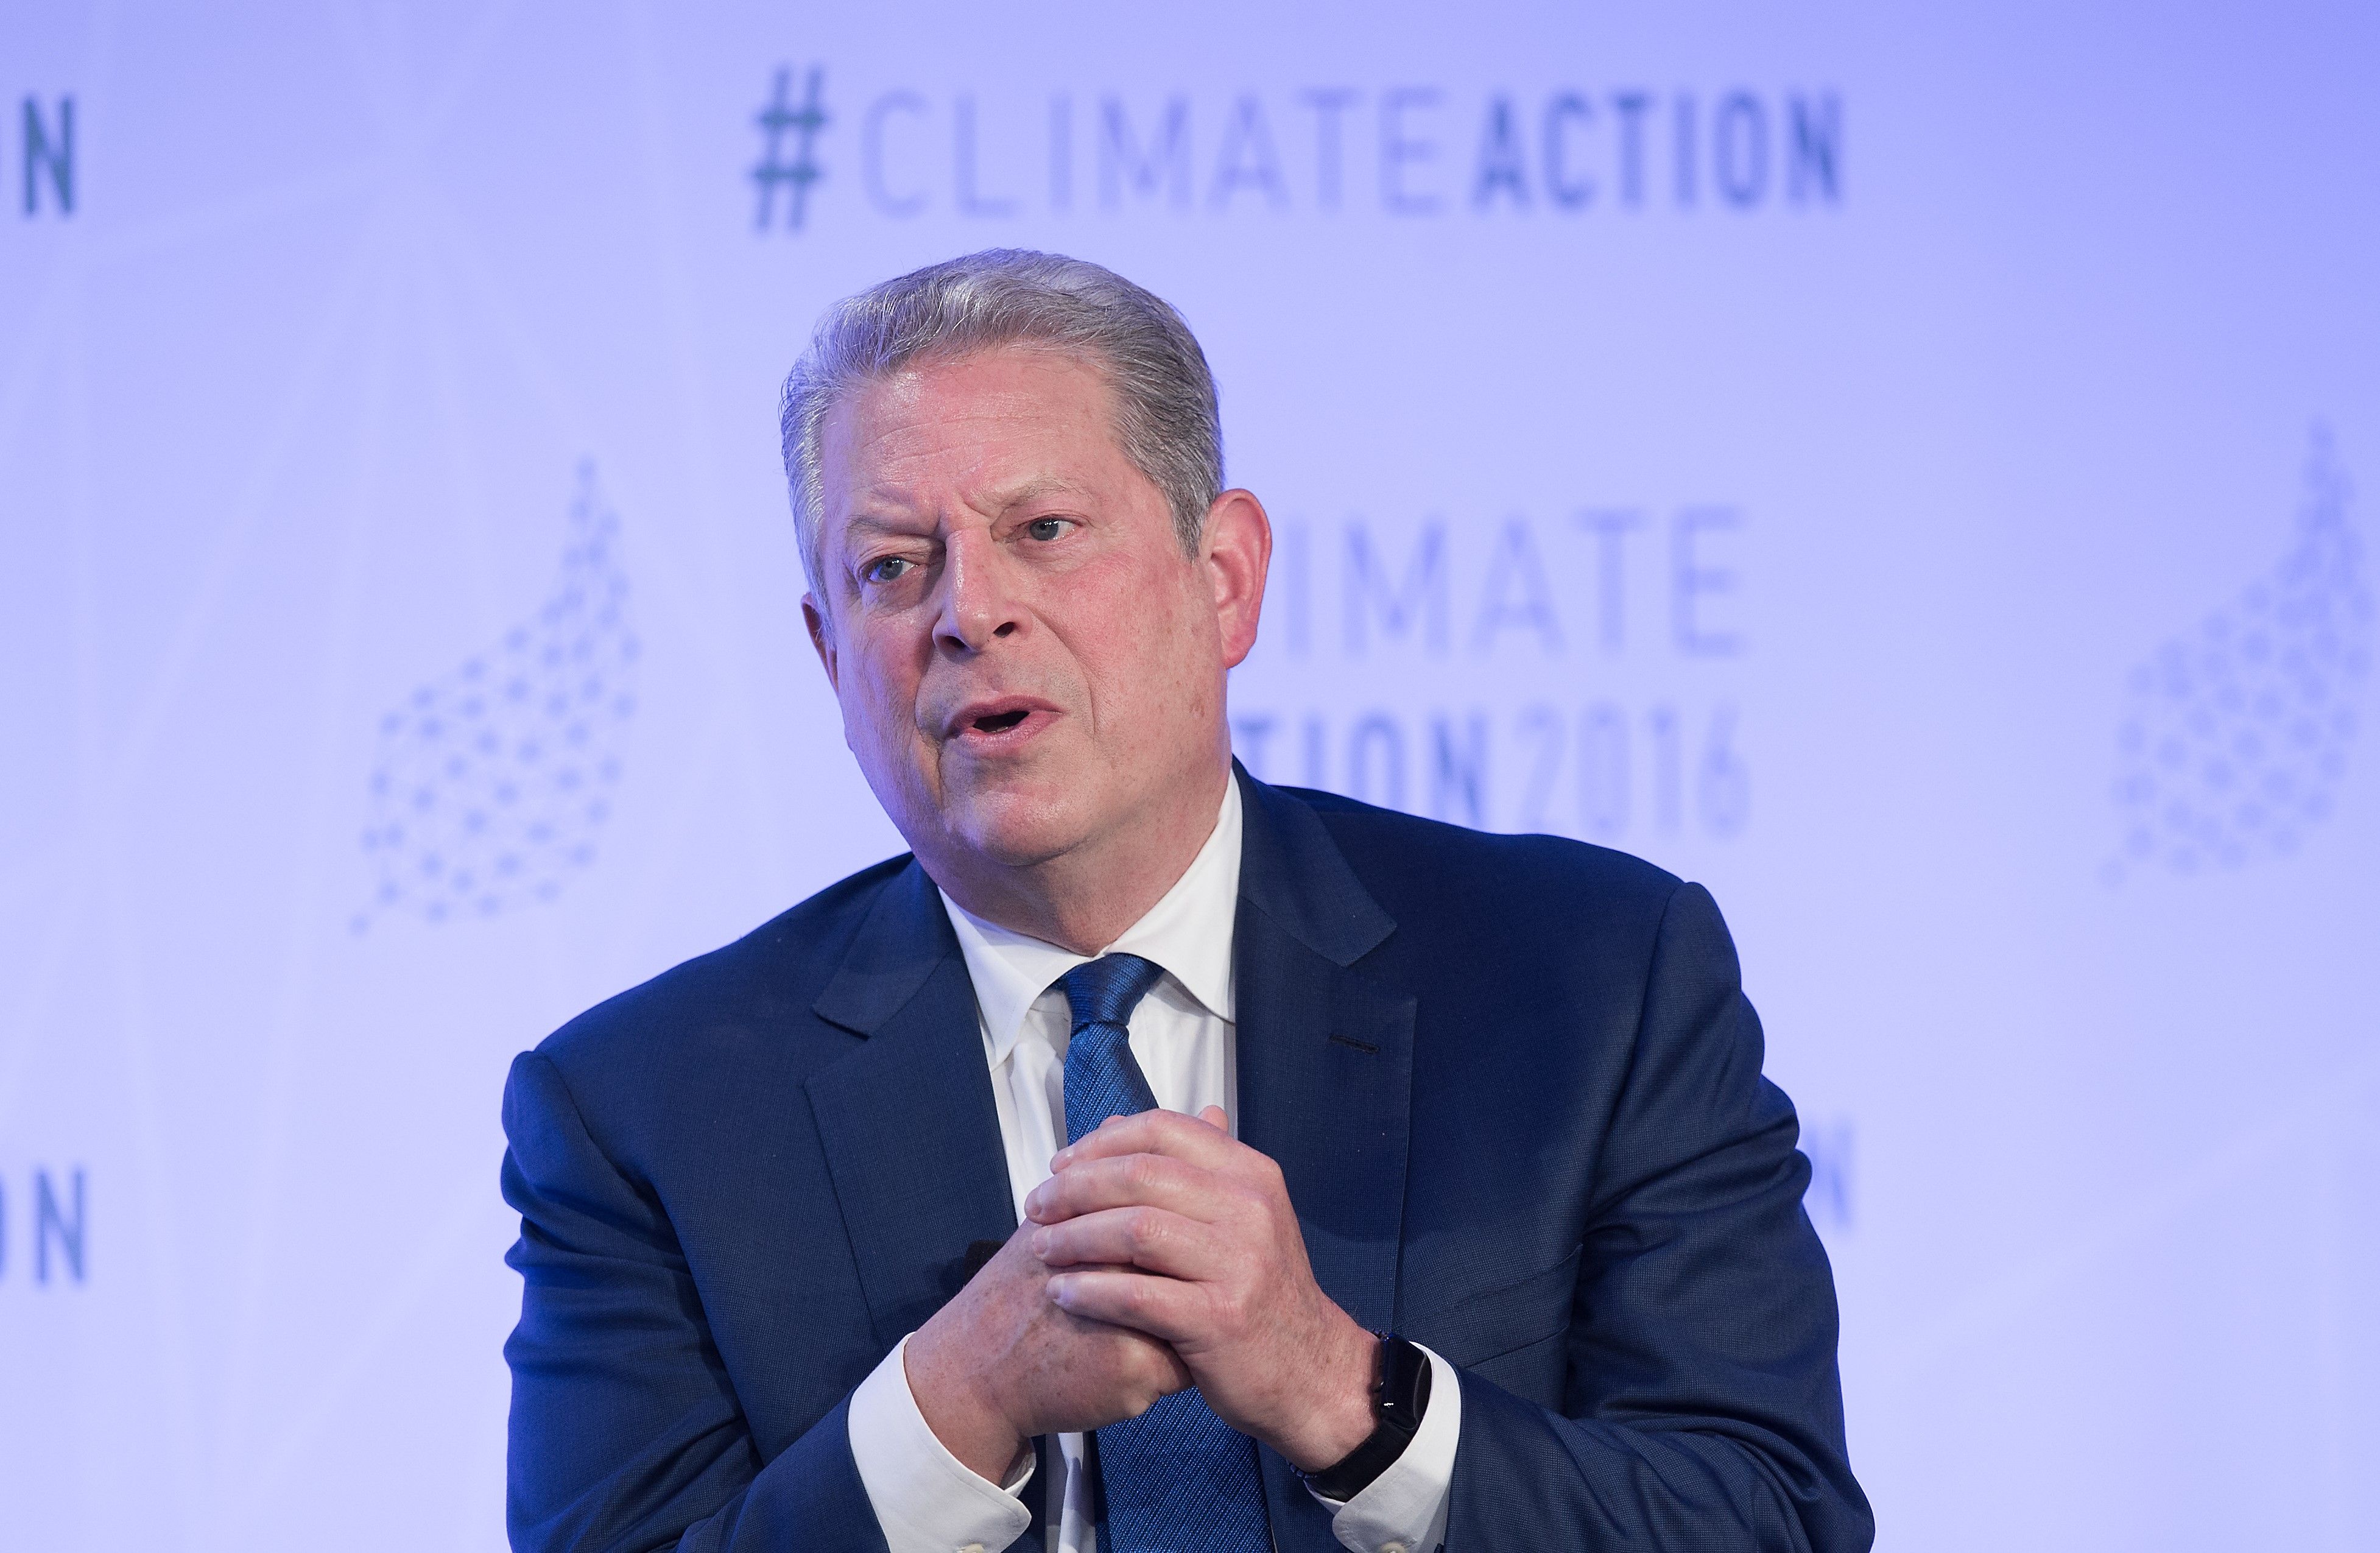 Al Gore speaking at environmental protection conference